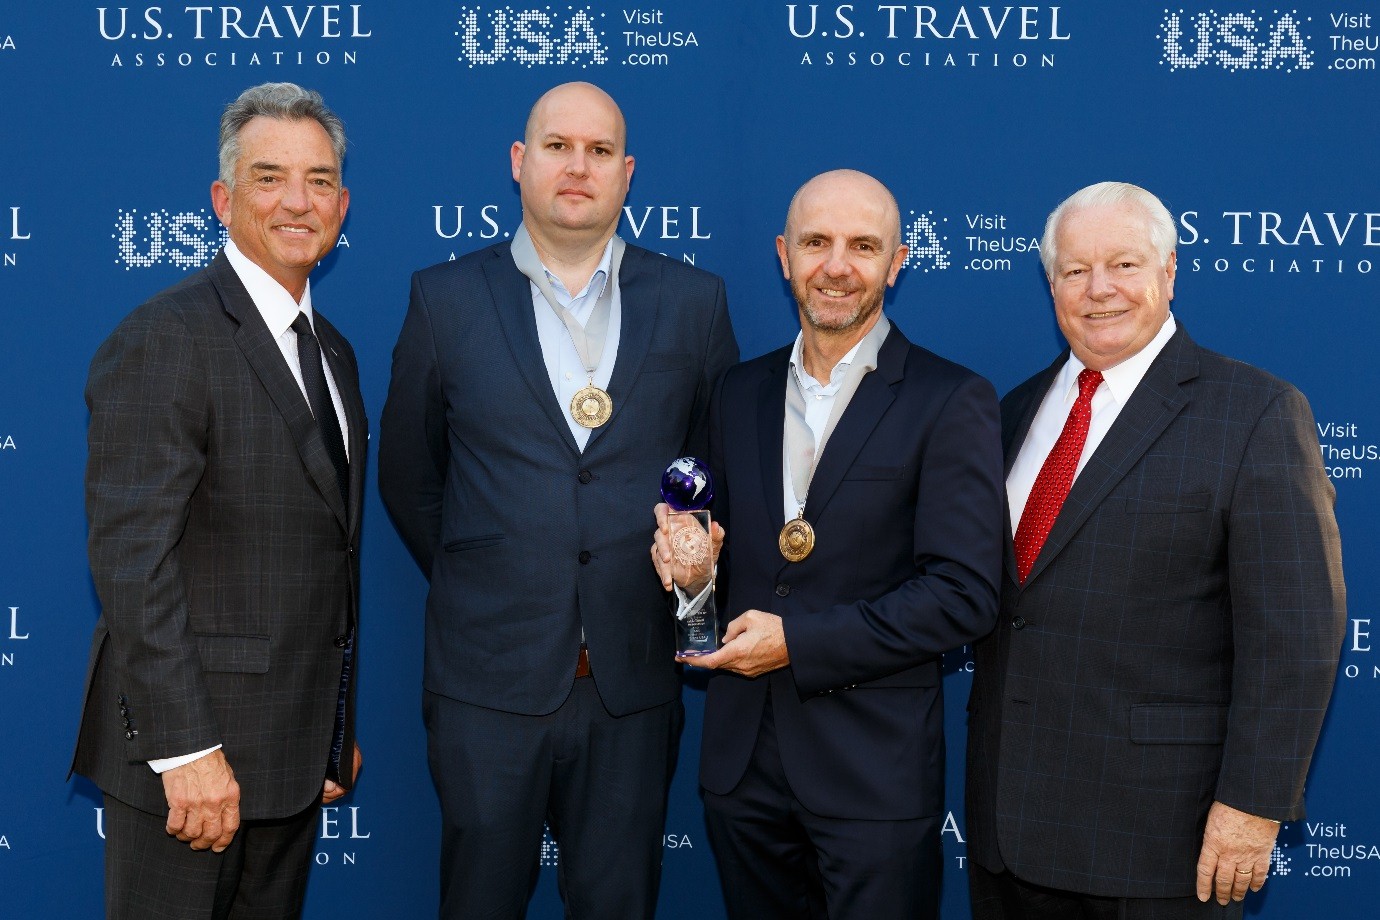 L-R: Christopher Thompson - President and CEO of Brand USA, Mark Brooker - Destination & Procurement Manager, Helloworld Travel Limited, Joe McCormack - GM Procurement, Helloworld Travel Limited, and Roger Dow- President and CEO of US Travel Association.